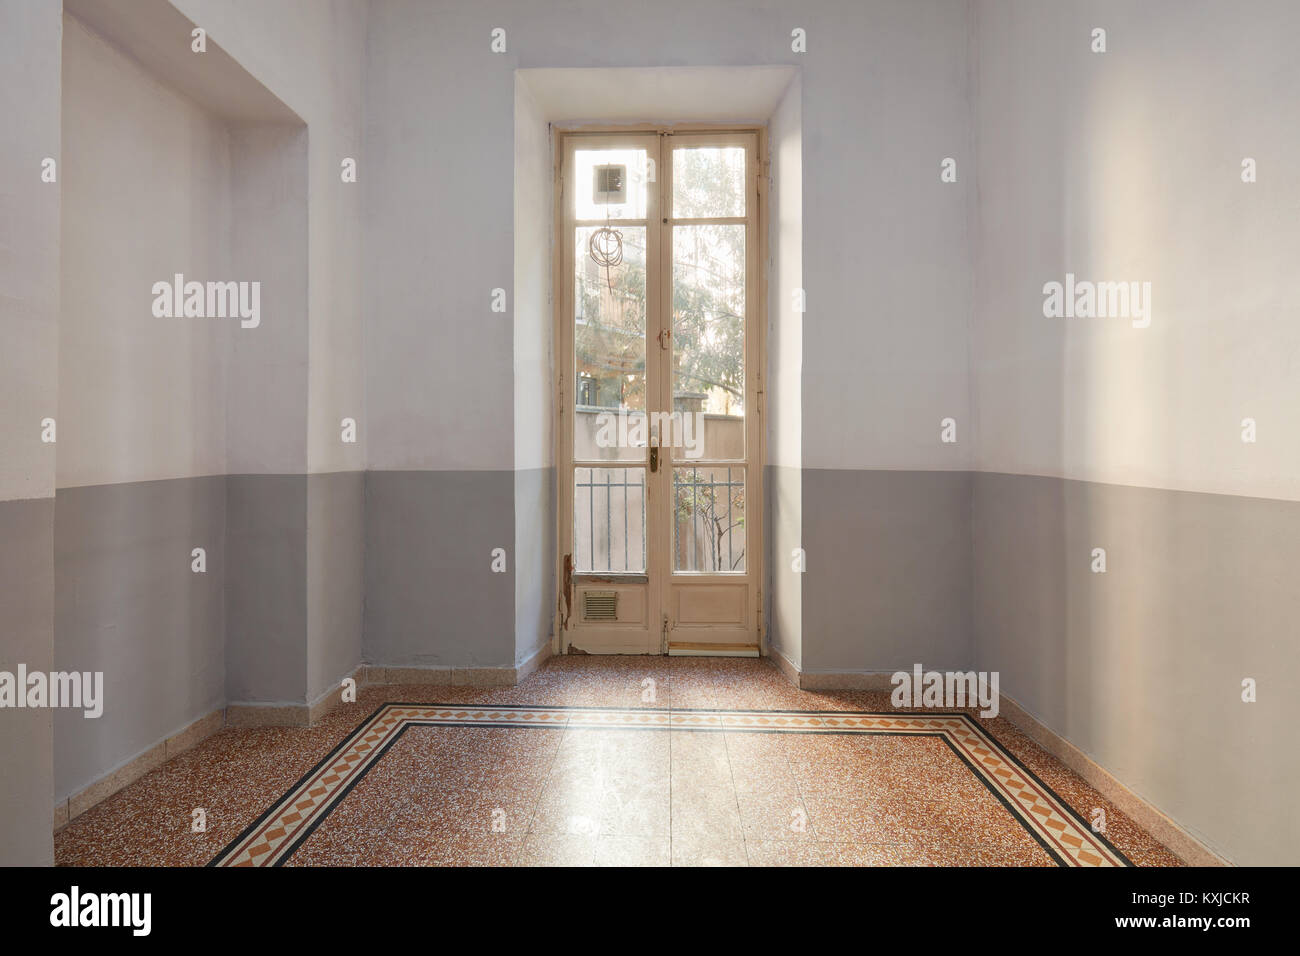 Empty room interior with tiled floor and window with balcony Stock Photo